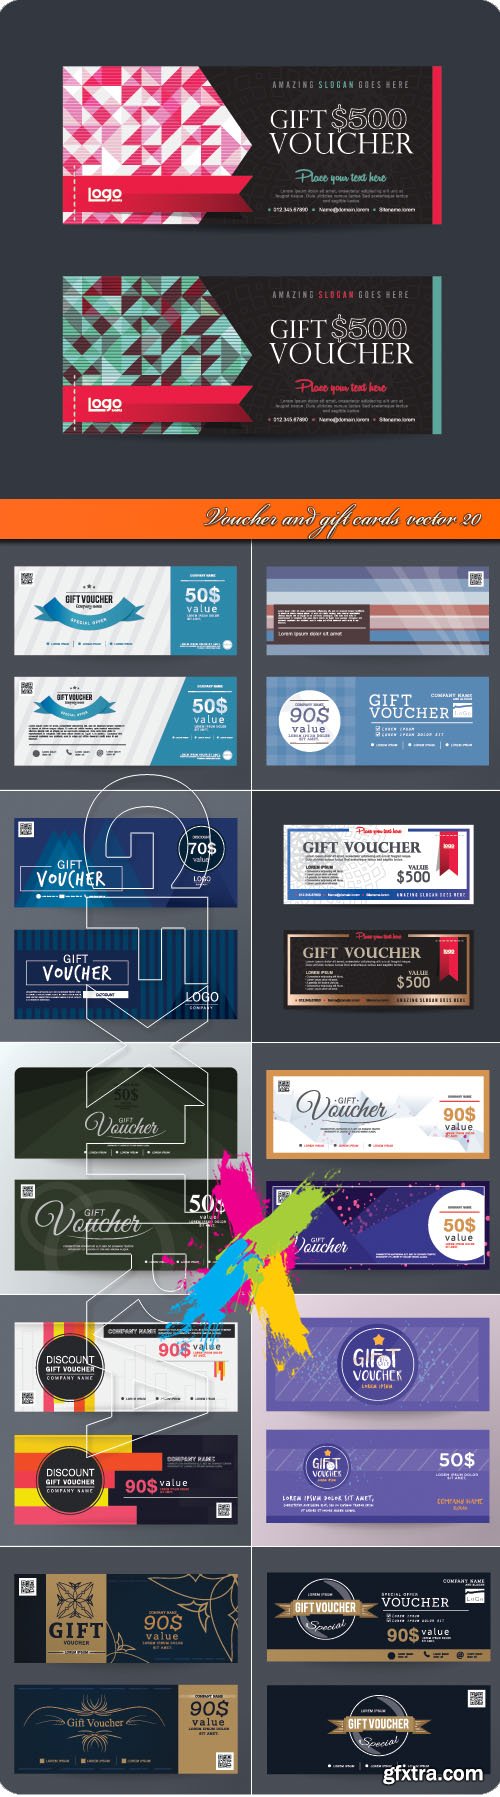 Voucher and gift cards vector 20